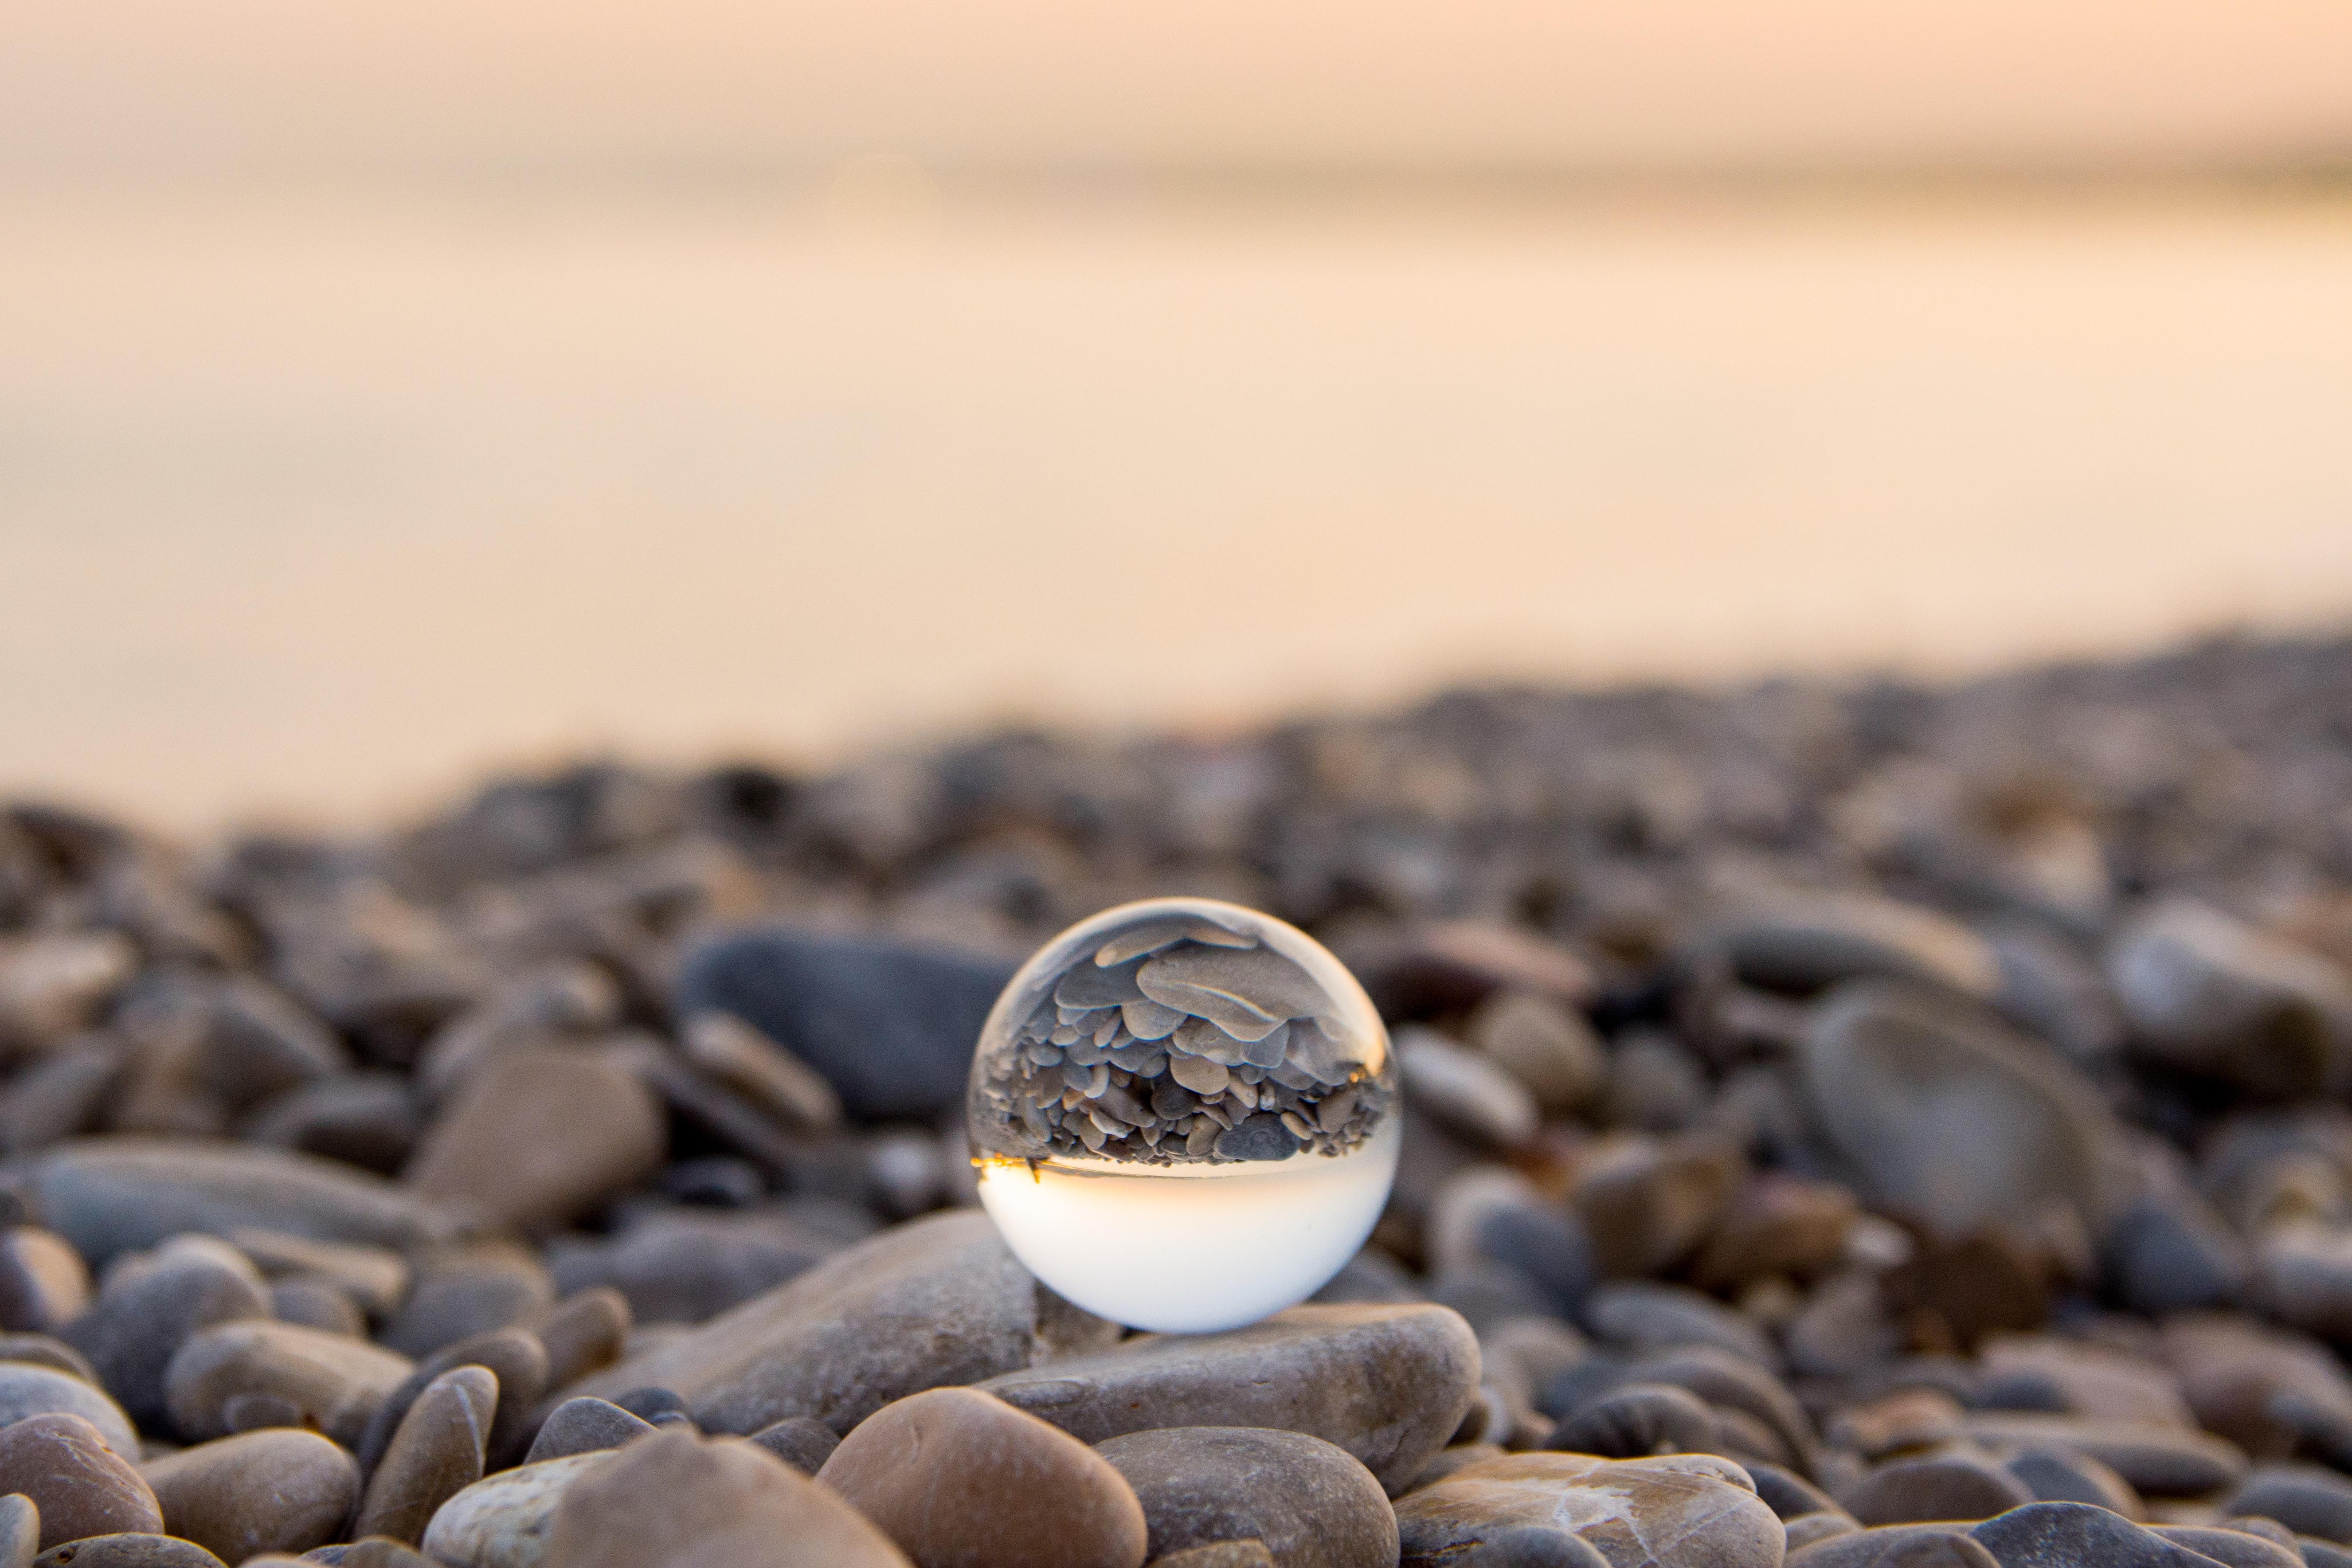 a photograph of a glass sphere on a pebbly beach